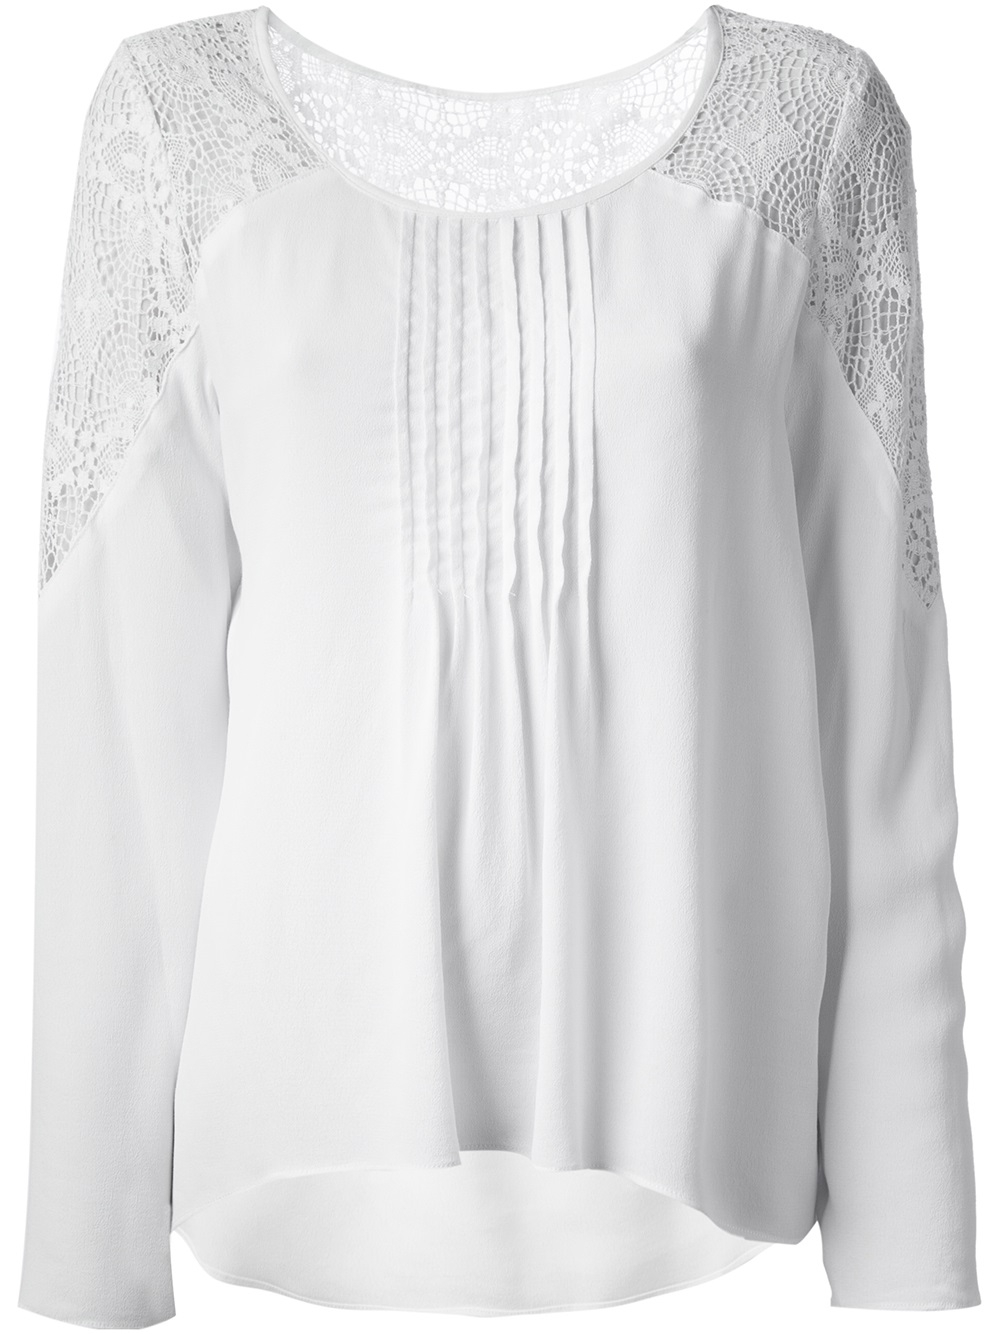 Lyst - Nicole Miller Broderie Anglaise Panel Blouse in White